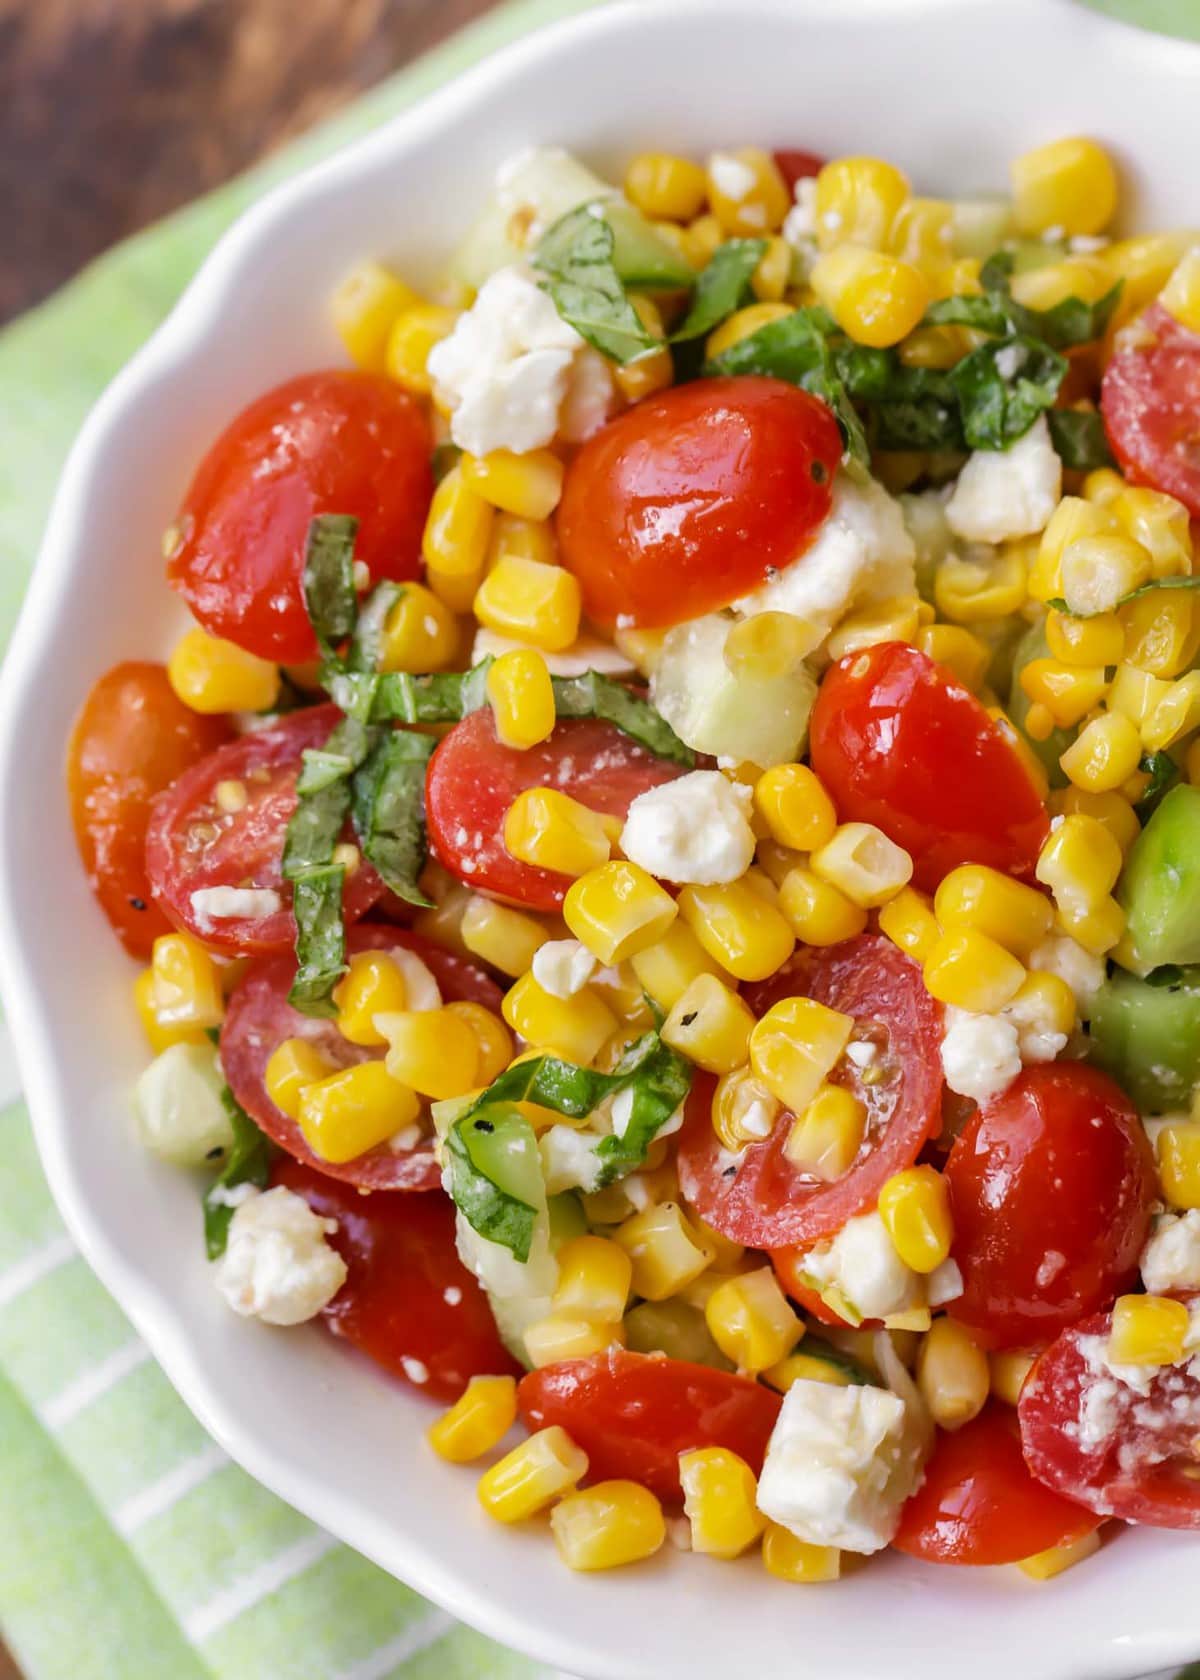 Corn Salad that includes corn, tomatoes, cucumber, cheese, and basil